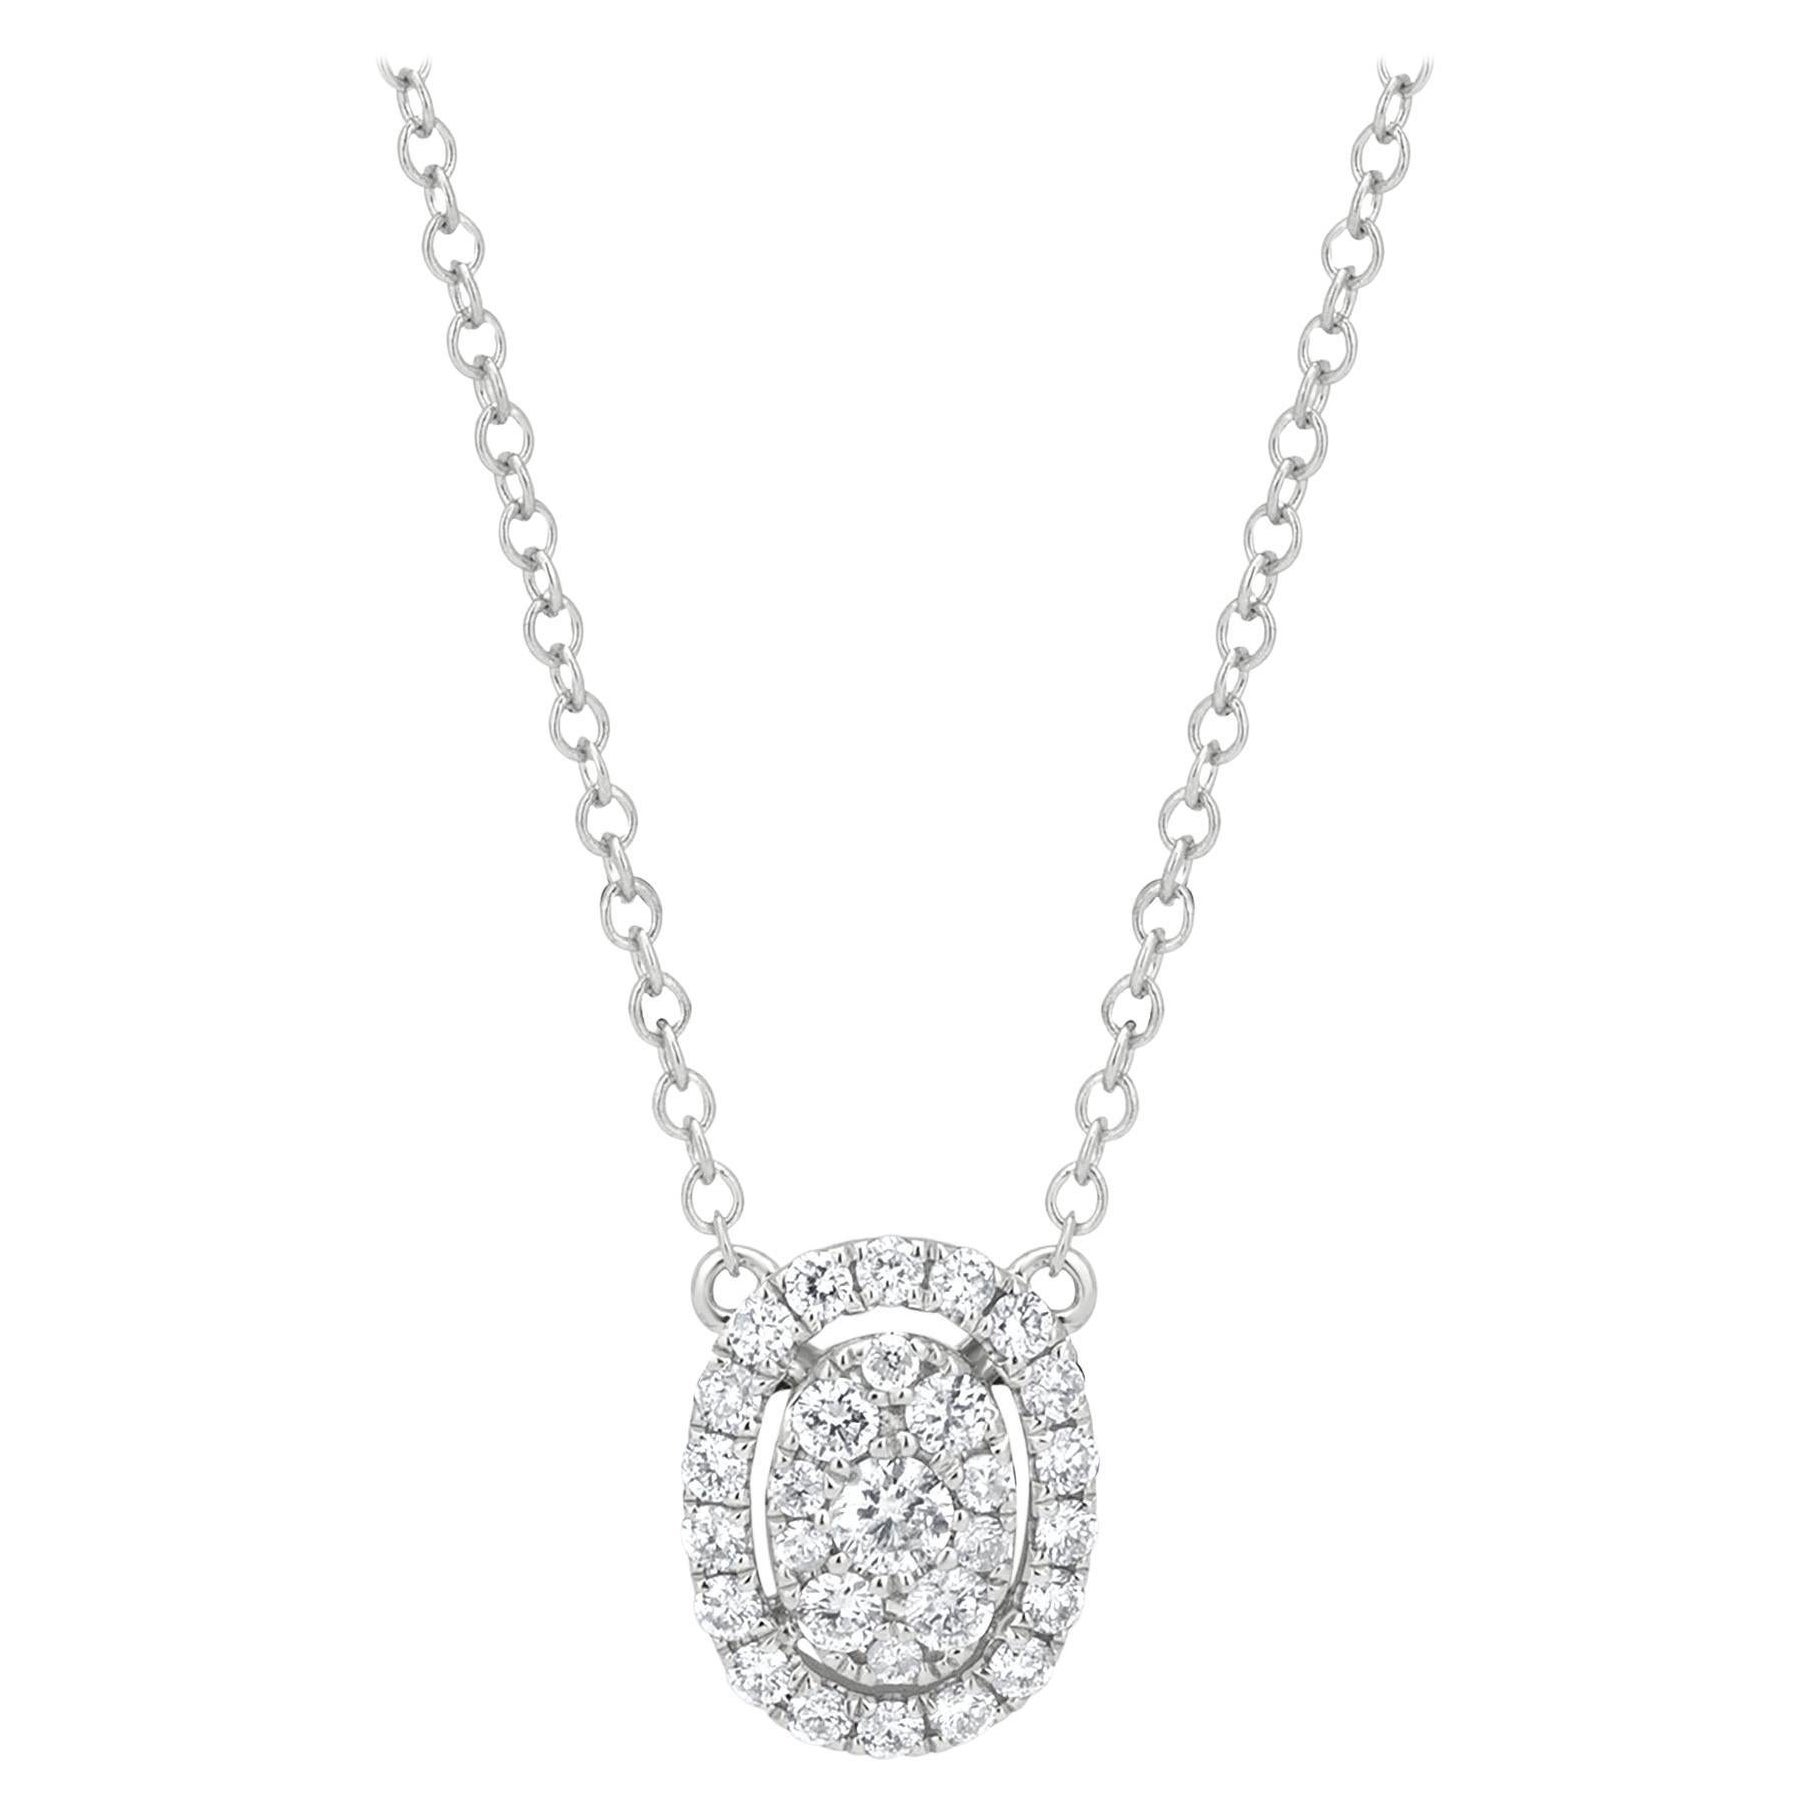 Luxle Oval-Shaped Diamond Cluster Pendant Necklace in 18k White Gold